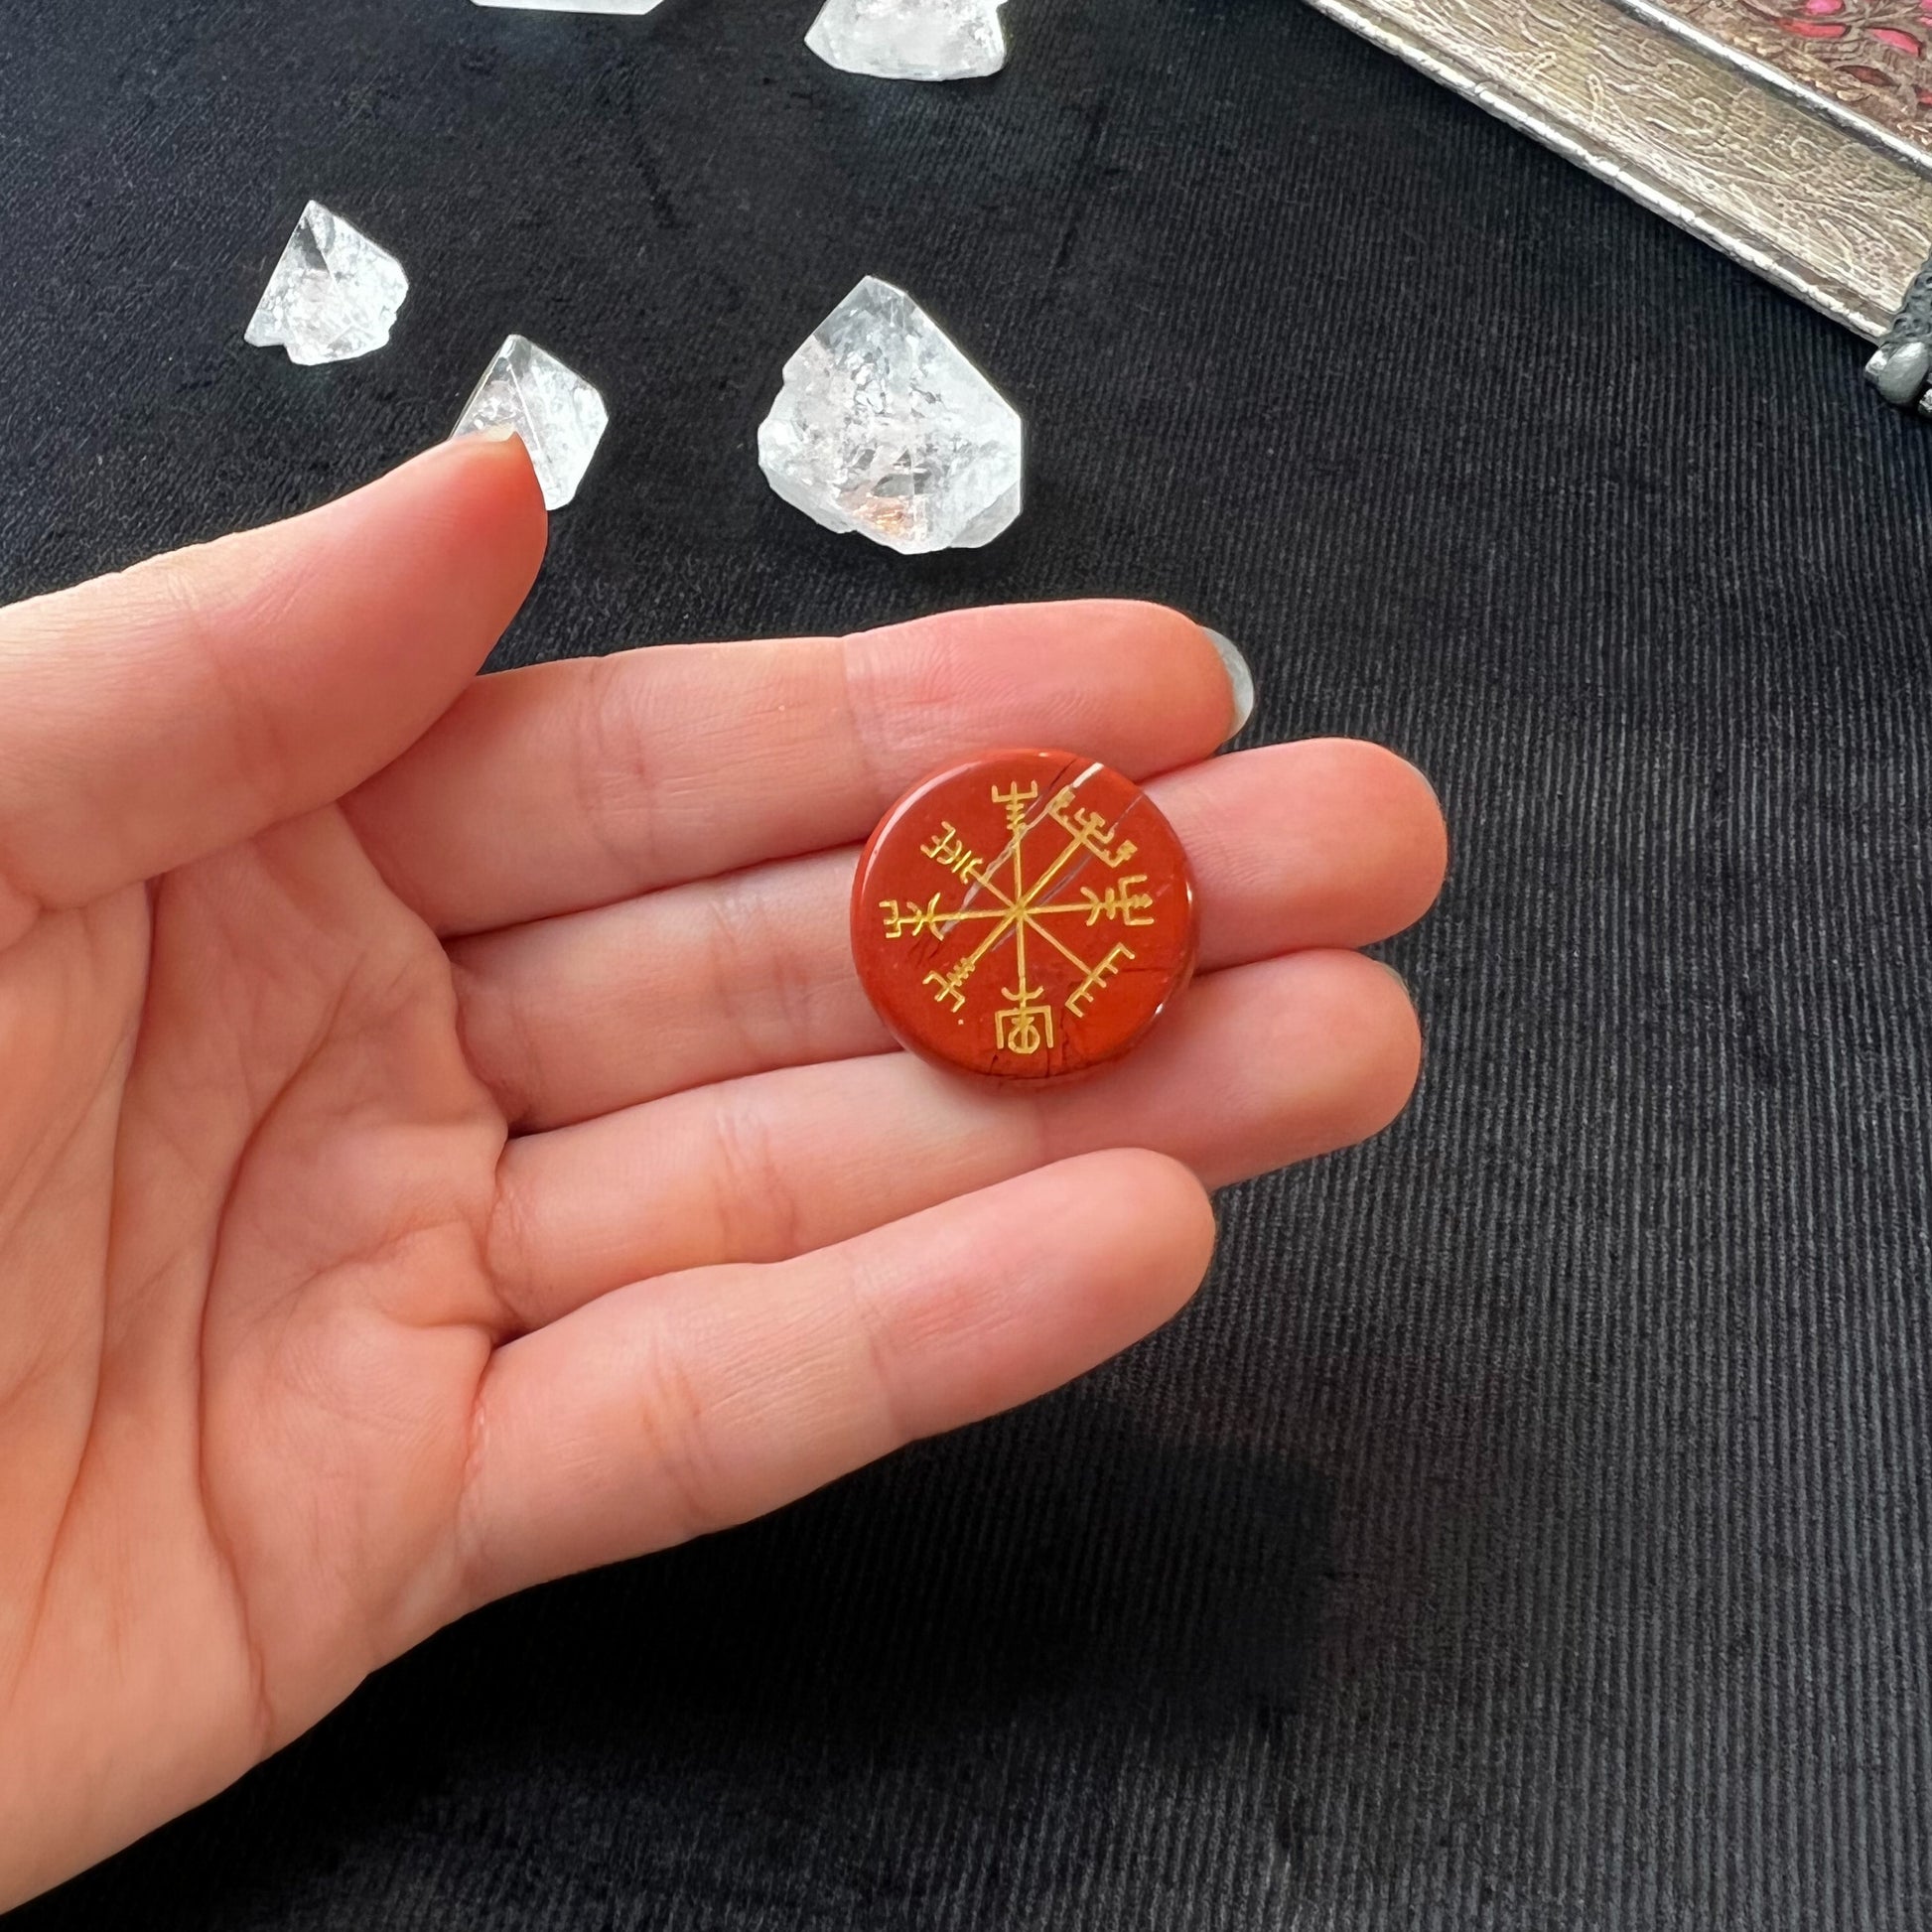 Red Jasper gemstone engraved with the Vegvisir symbol - The French Witch shop